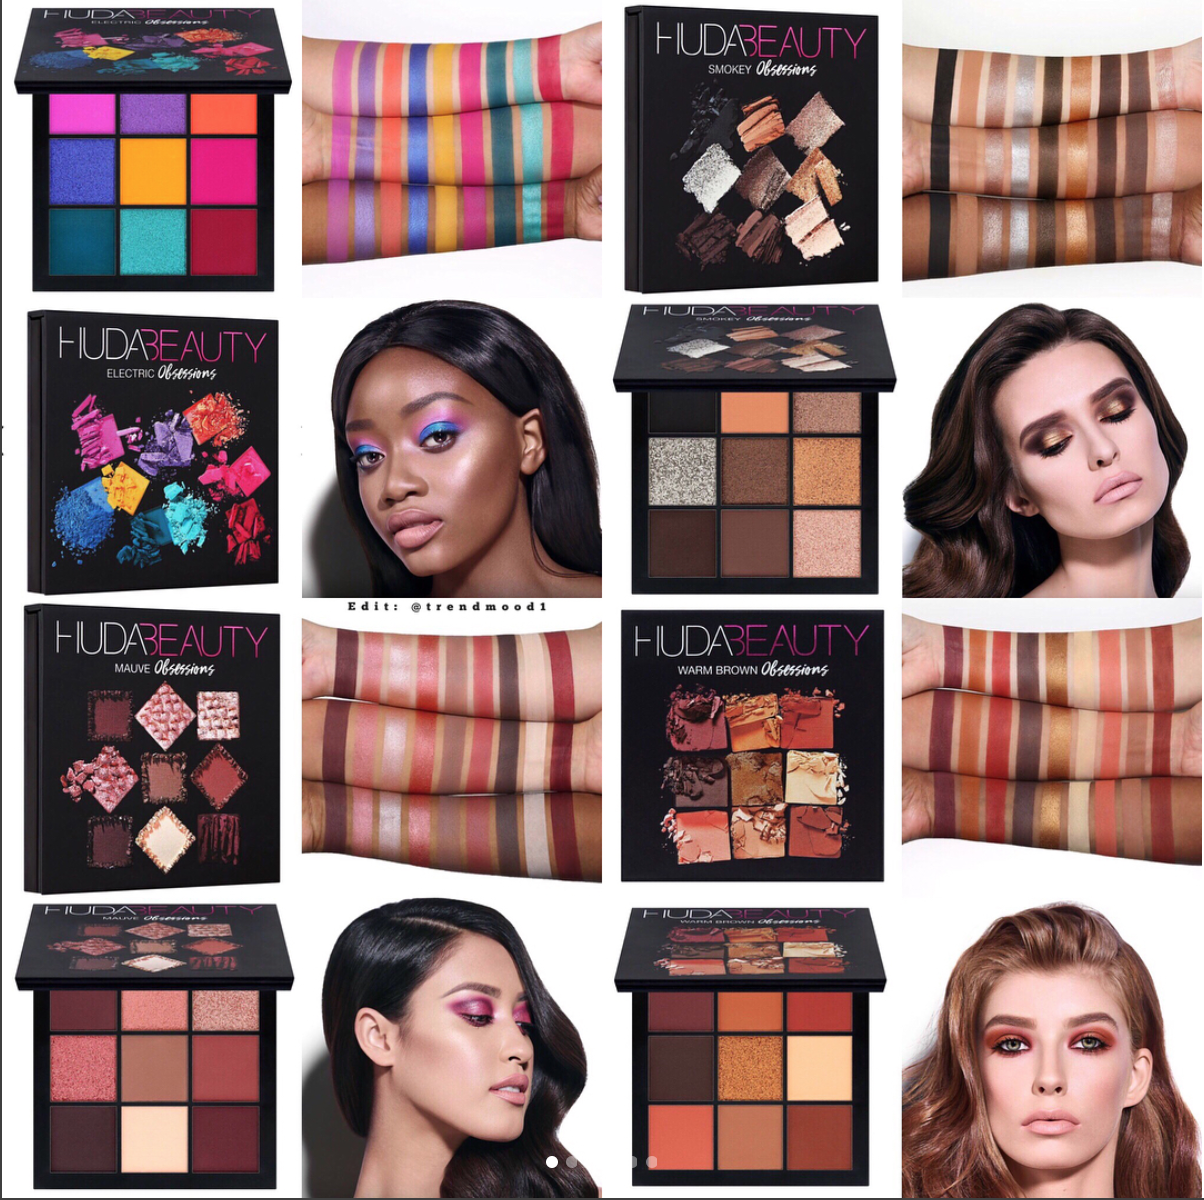 Huda Beauty Mini Eyeshadow palette swatches. Electric Obsession, Warm Brown Obsession, Smokey Obsession, and Mauve Obsession palettes.